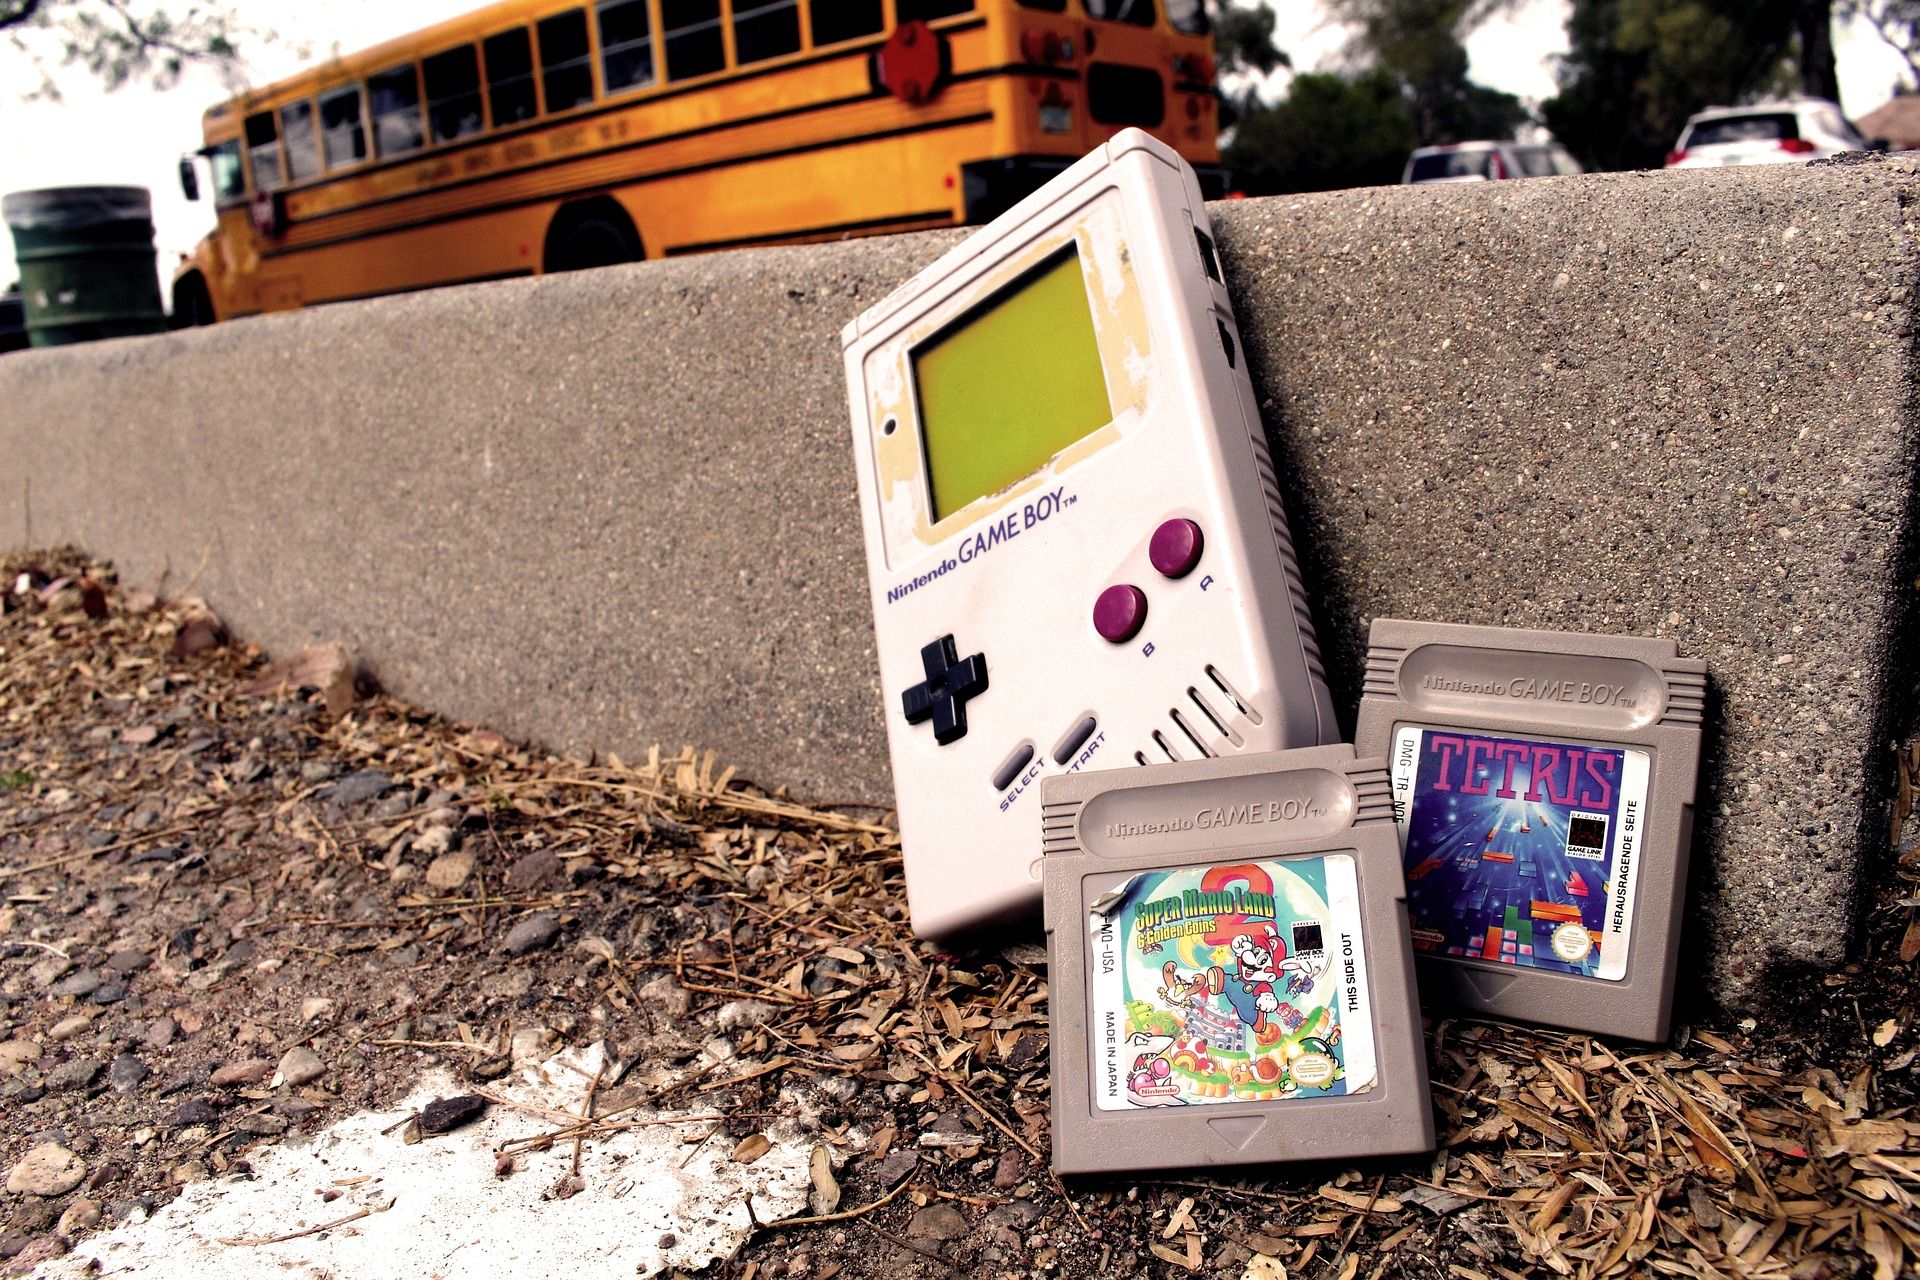 A Nintendo Gameboy resting against a concrete curb with a Tetris and a Mario Brothers game cartridge next to it.